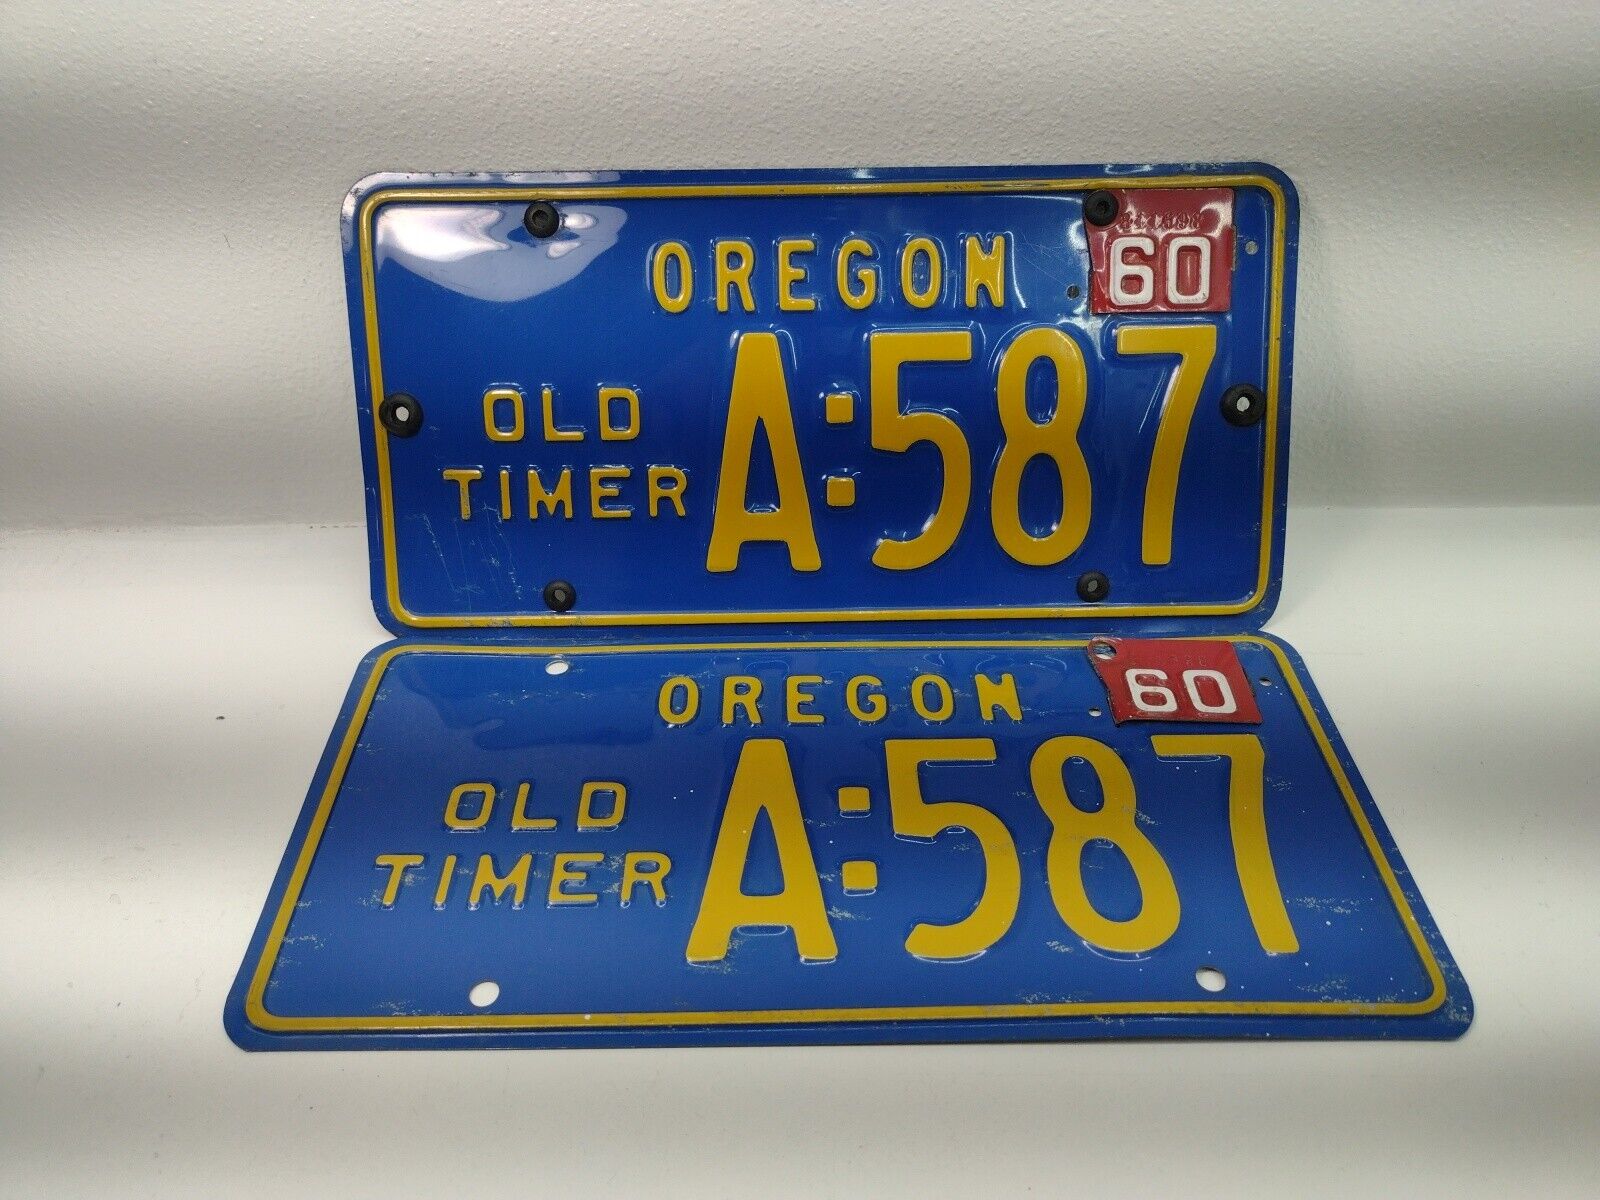 1956 Old Timer License Plates With 1960 Tags - A-587 - Very Good to Excellent